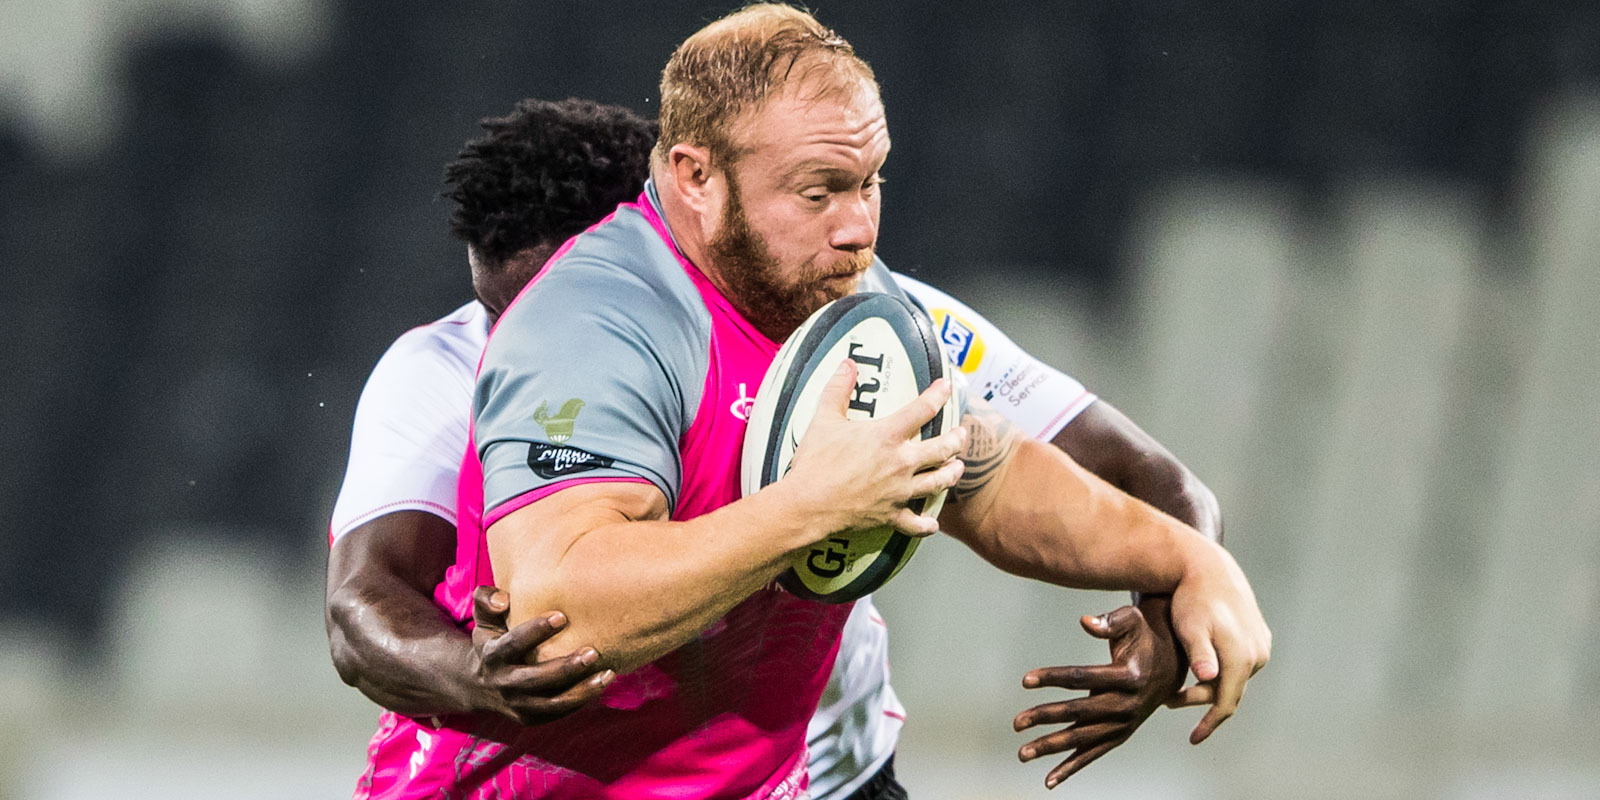 Simon Westraadt scored the New Nation Pumas' second try and delivered a typically livewire performance.